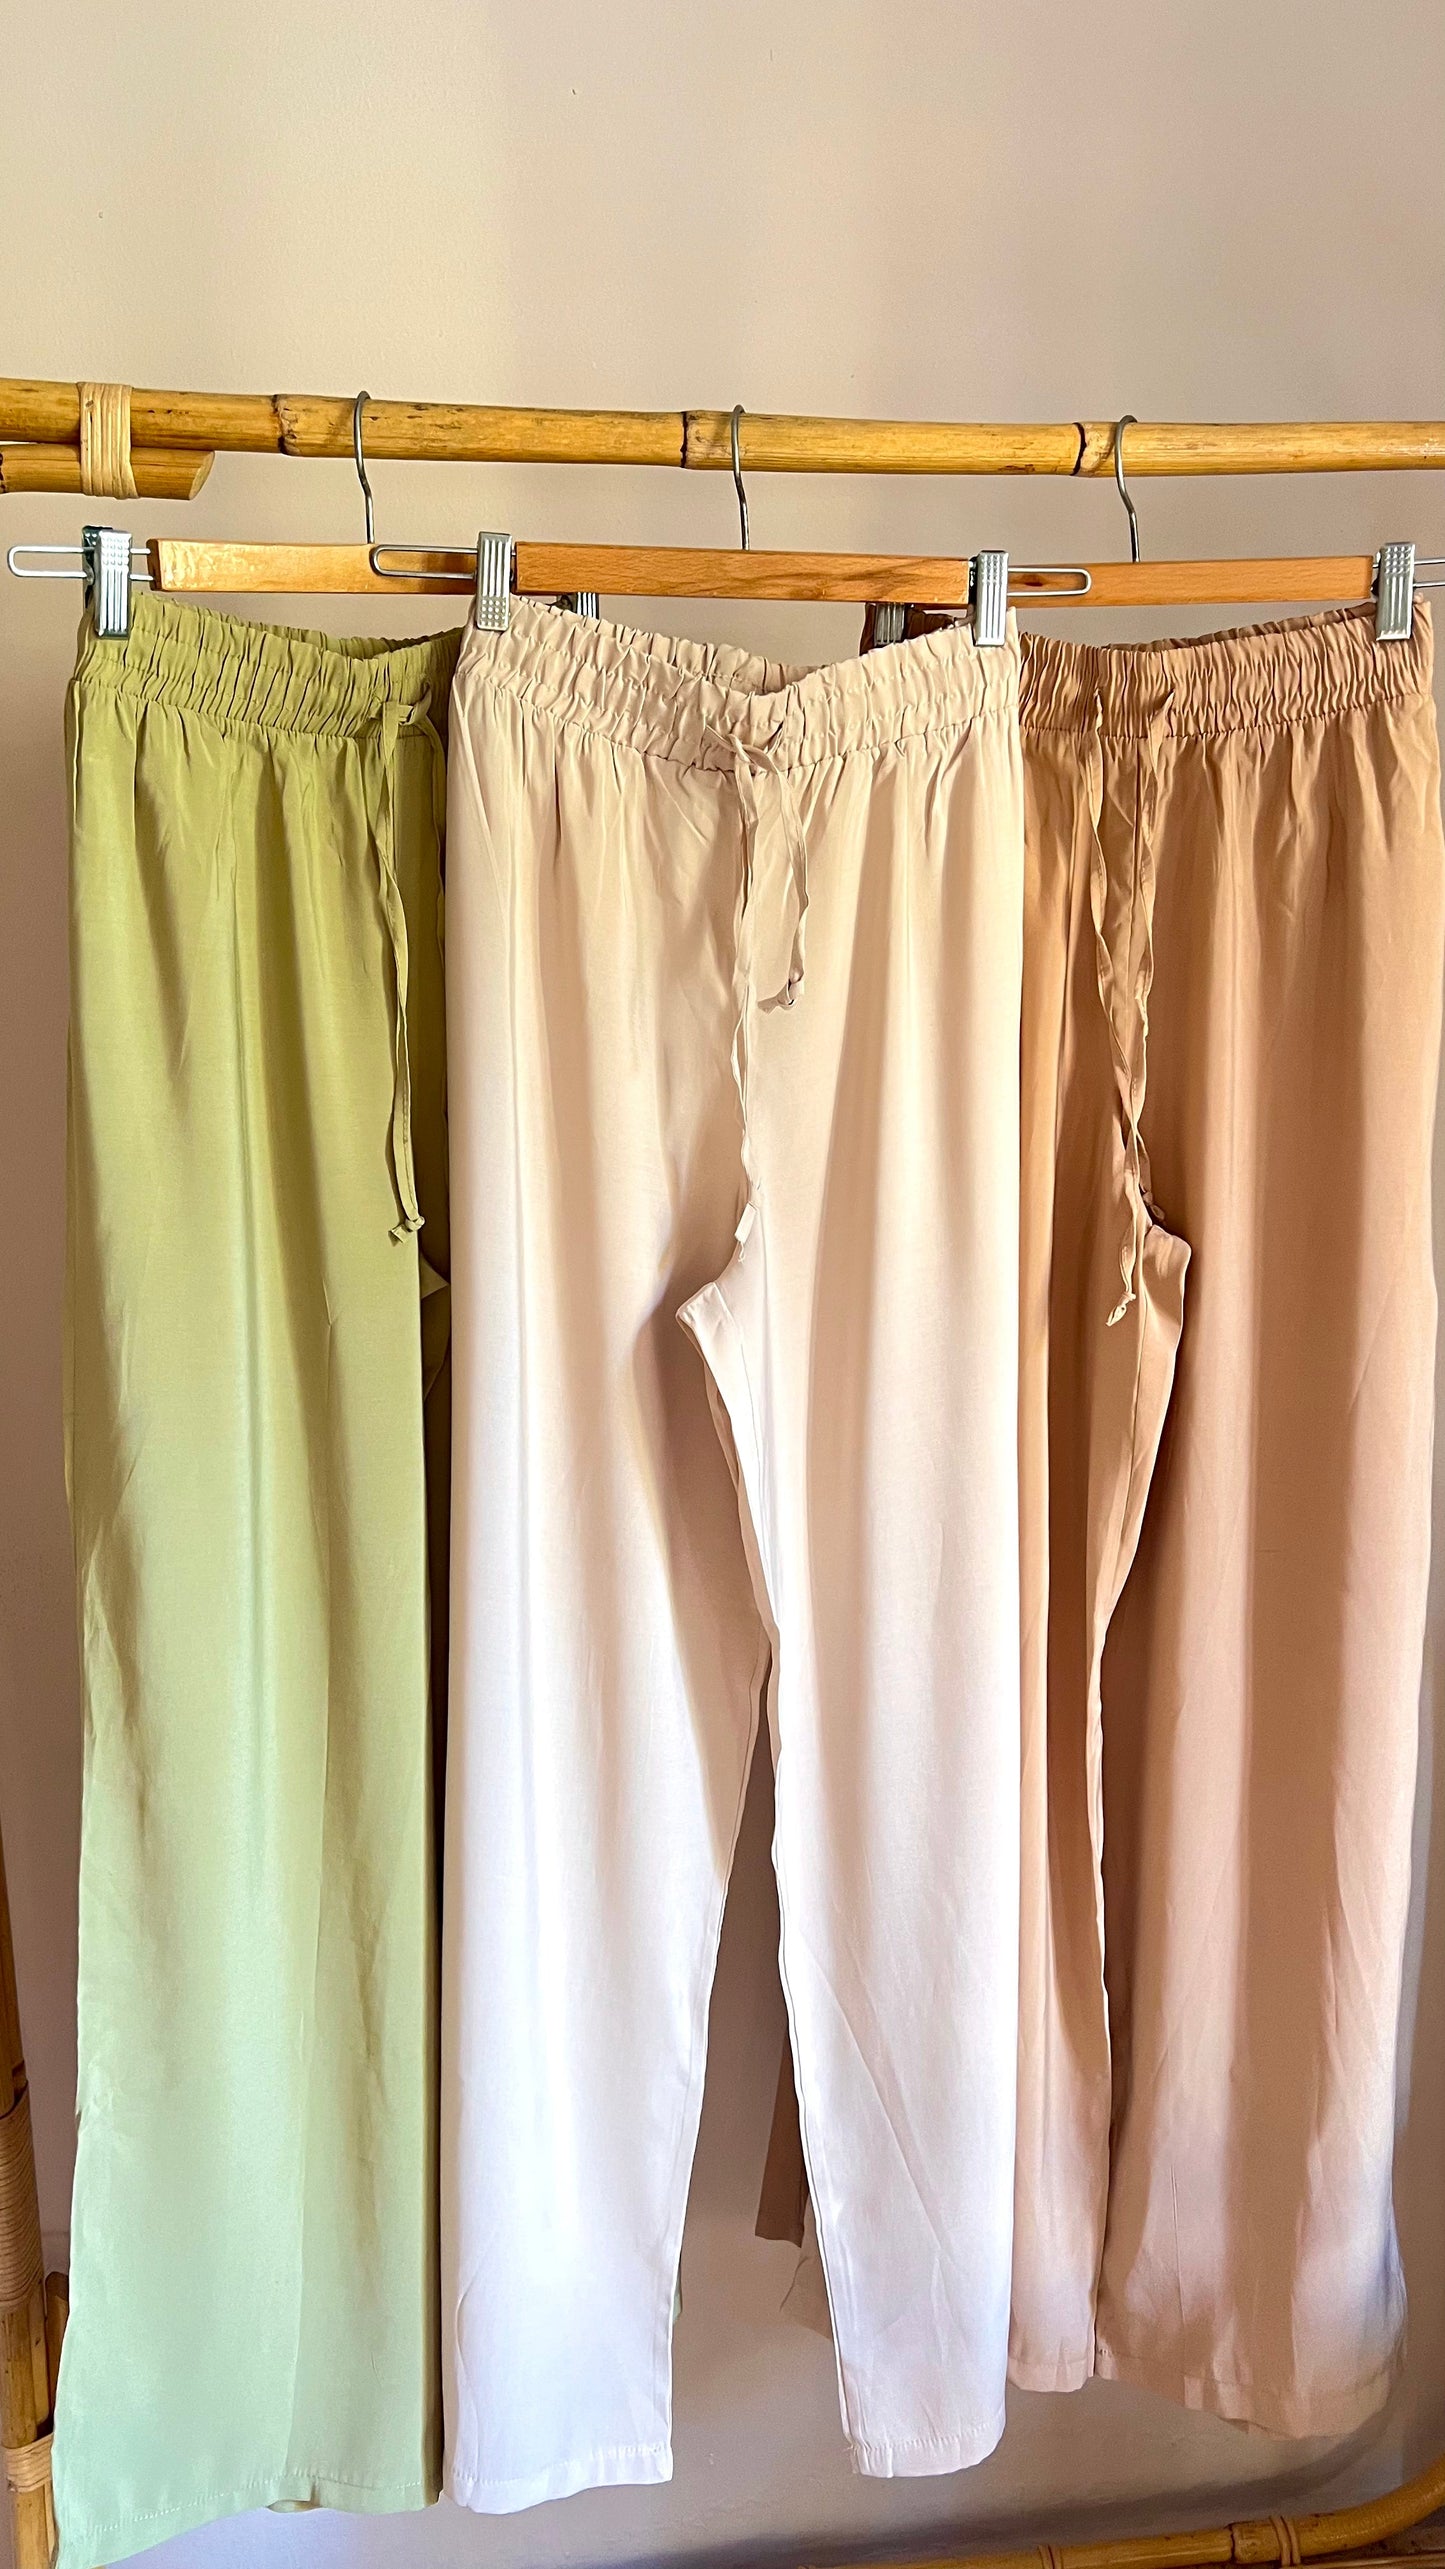 Camel Straight Pants with Elastic Waist